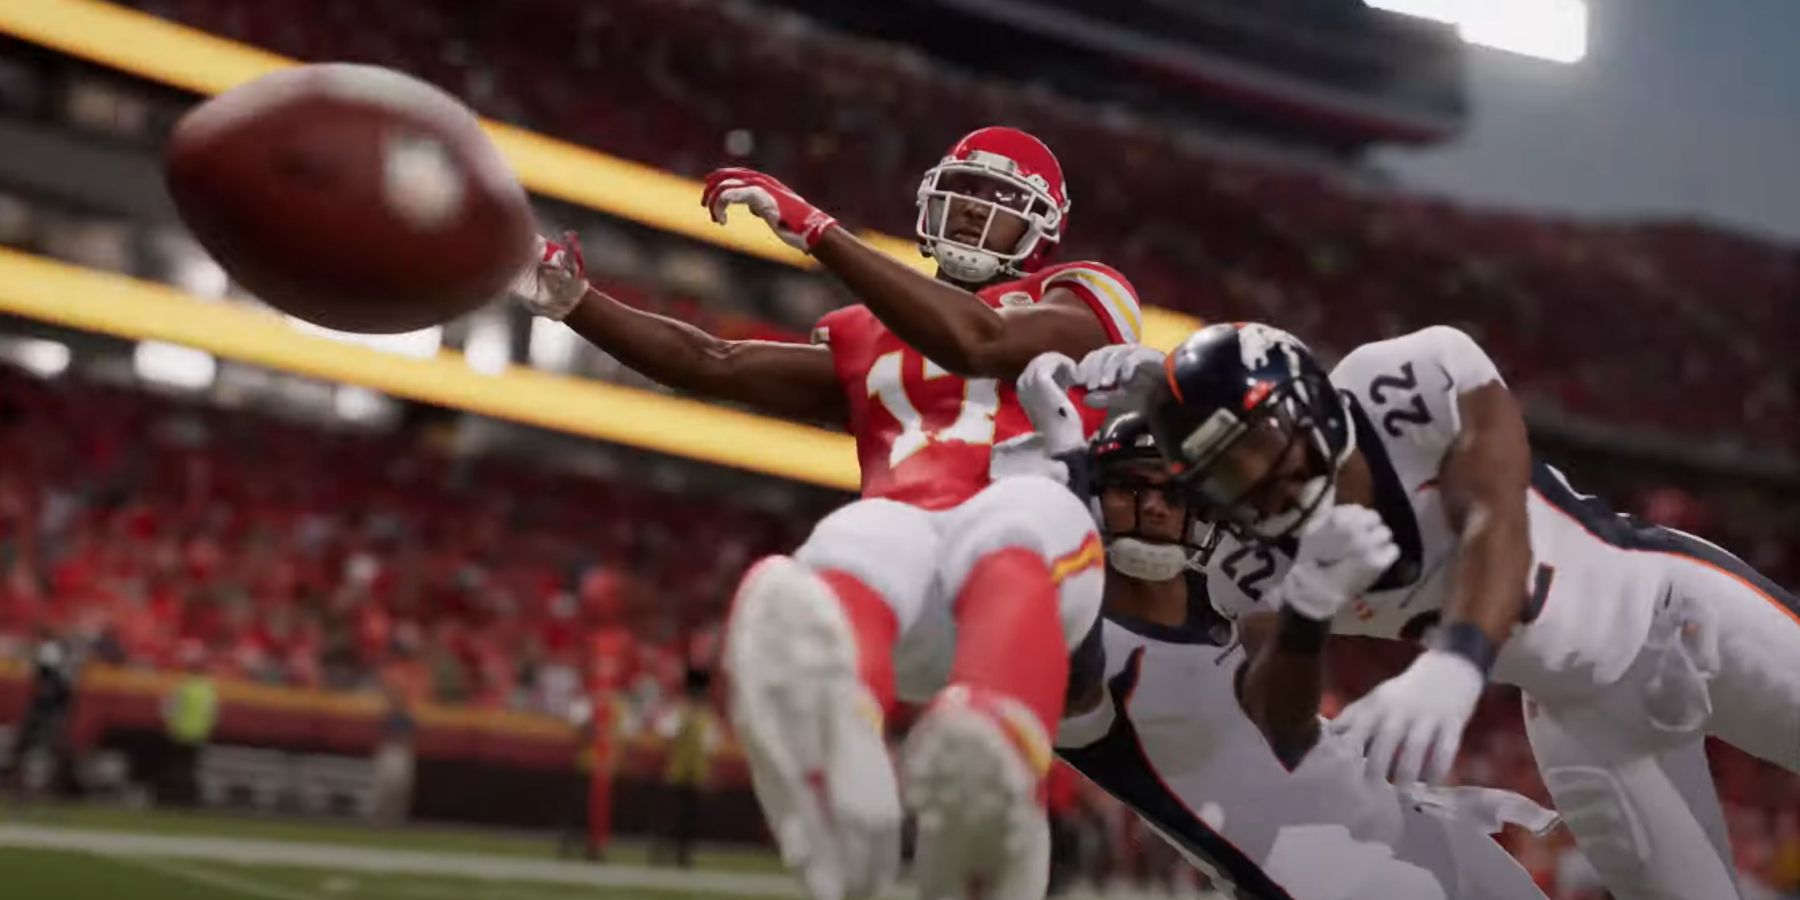 release date for madden 23